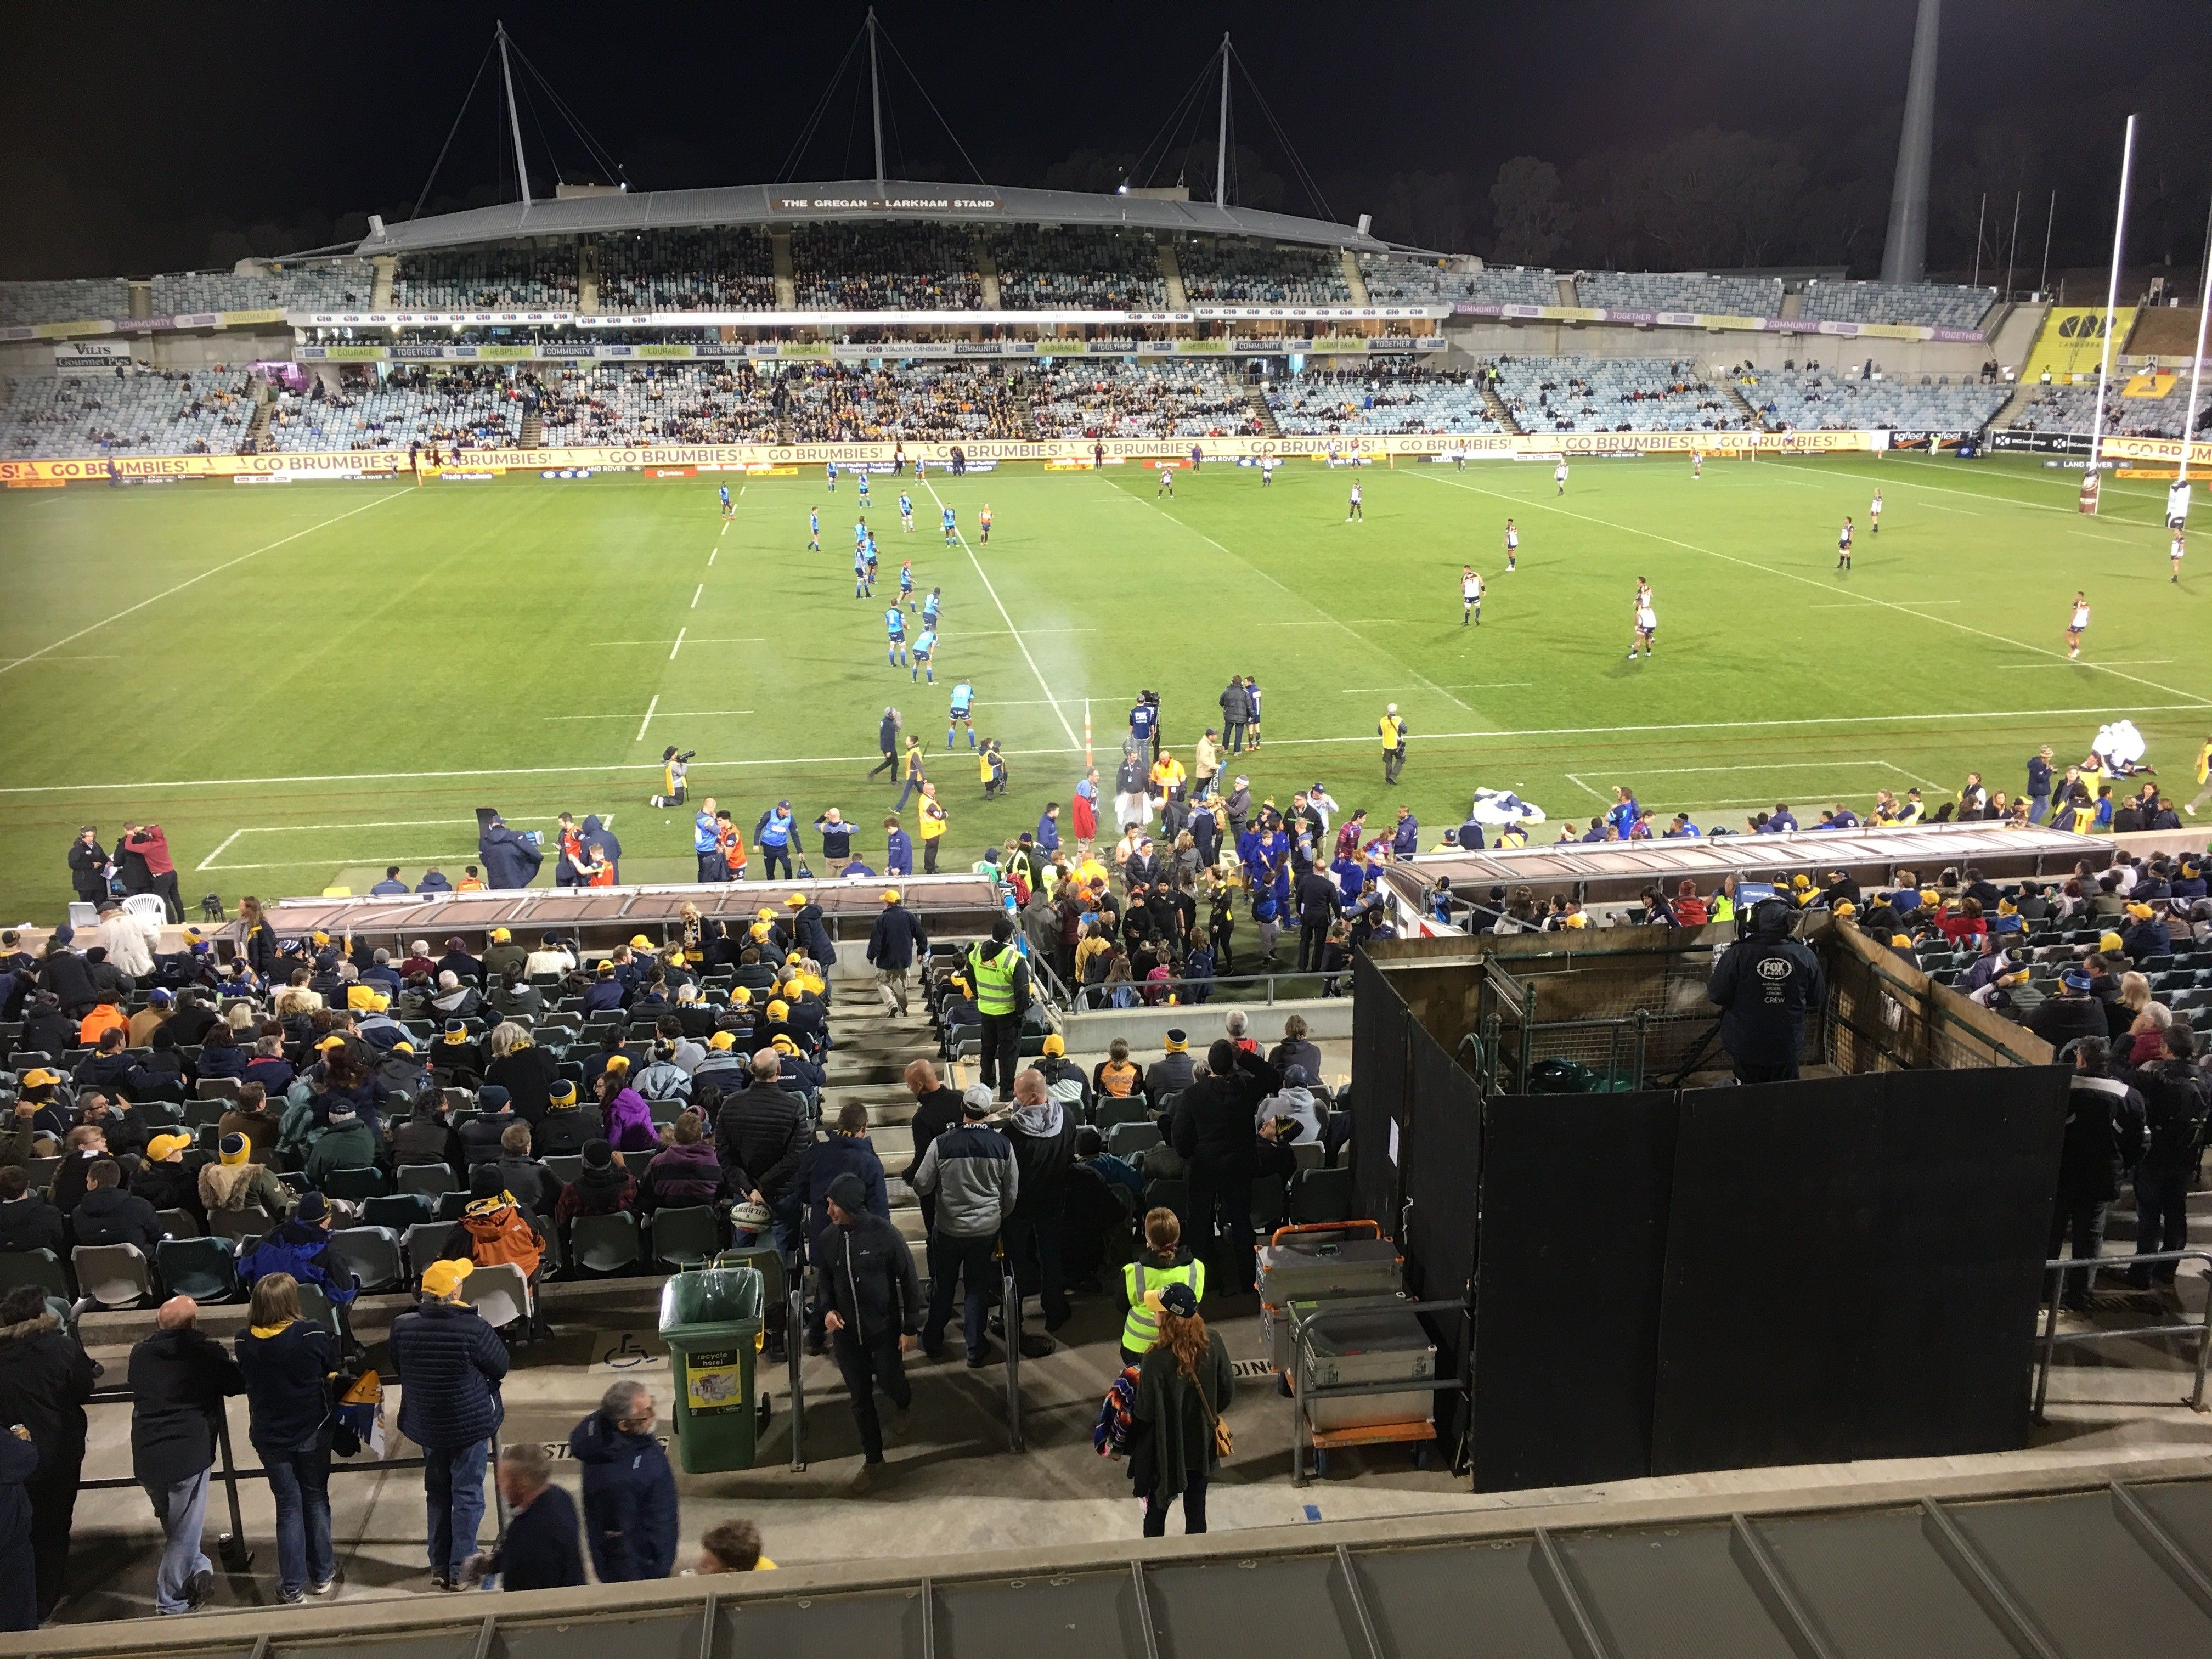 Is this crisis time for the Brumbies? Why we need to support our local team